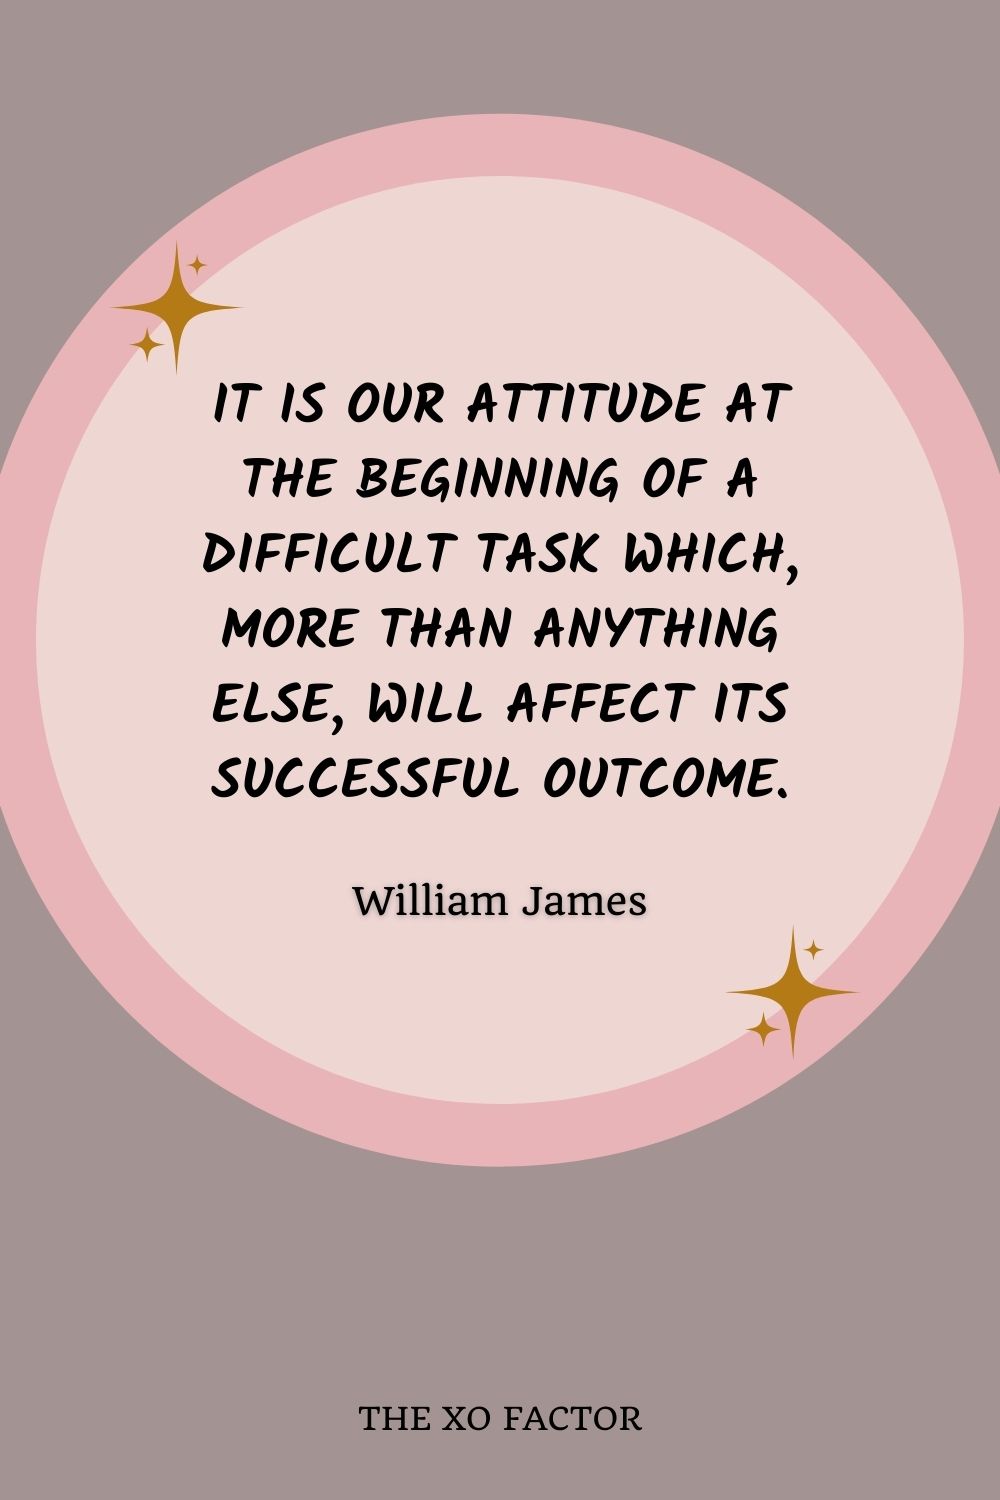 It is our attitude at the beginning of a difficult task which, more than anything else, will affect its successful outcome.” – William James